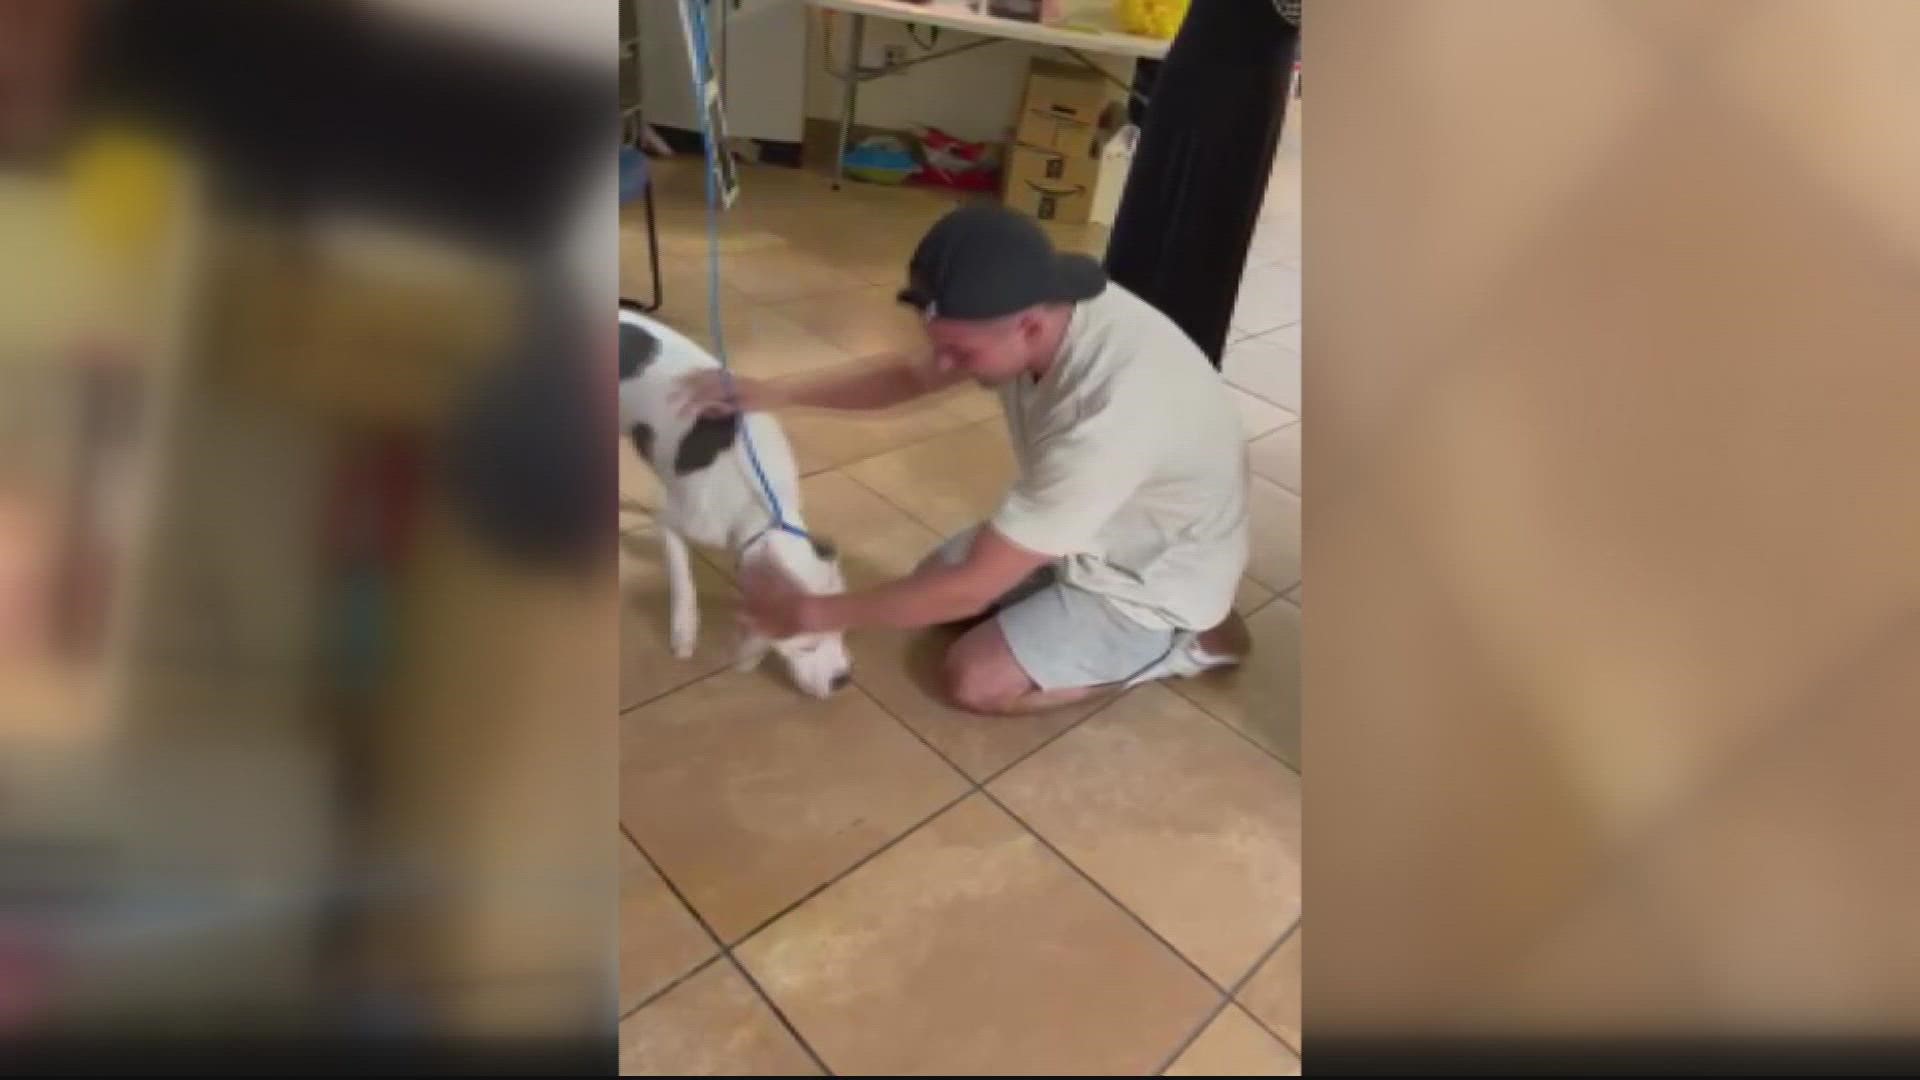 An actor in the musical Hamilton was overcome with emotion when he finally reunited with his dog after it got loose during a car crash in D.C. Saturday.